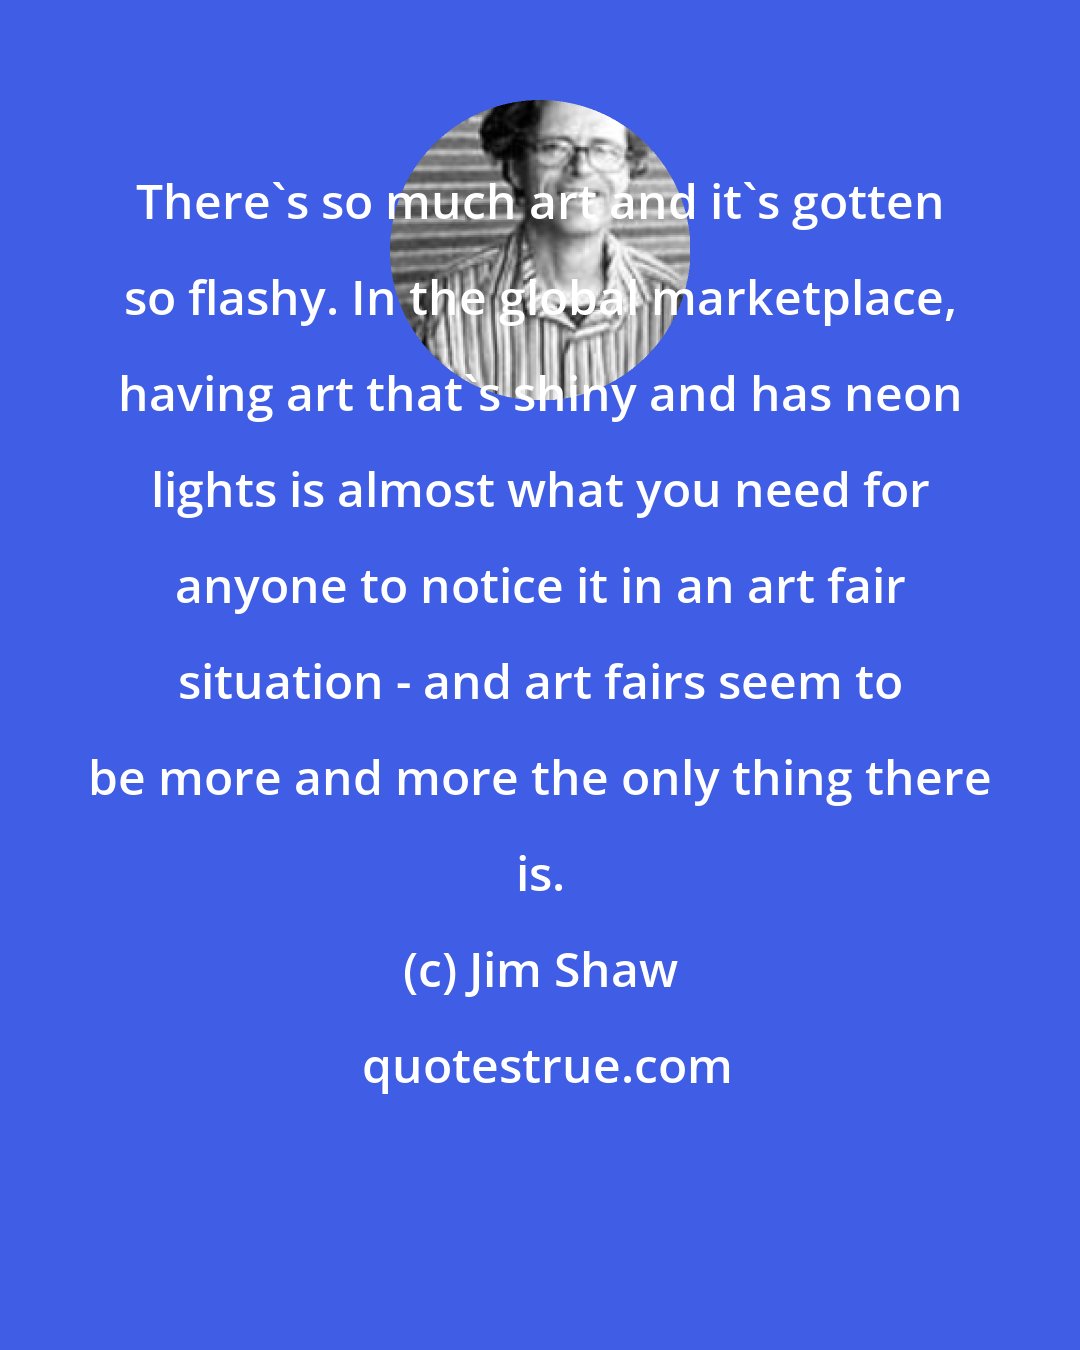 Jim Shaw: There's so much art and it's gotten so flashy. In the global marketplace, having art that's shiny and has neon lights is almost what you need for anyone to notice it in an art fair situation - and art fairs seem to be more and more the only thing there is.